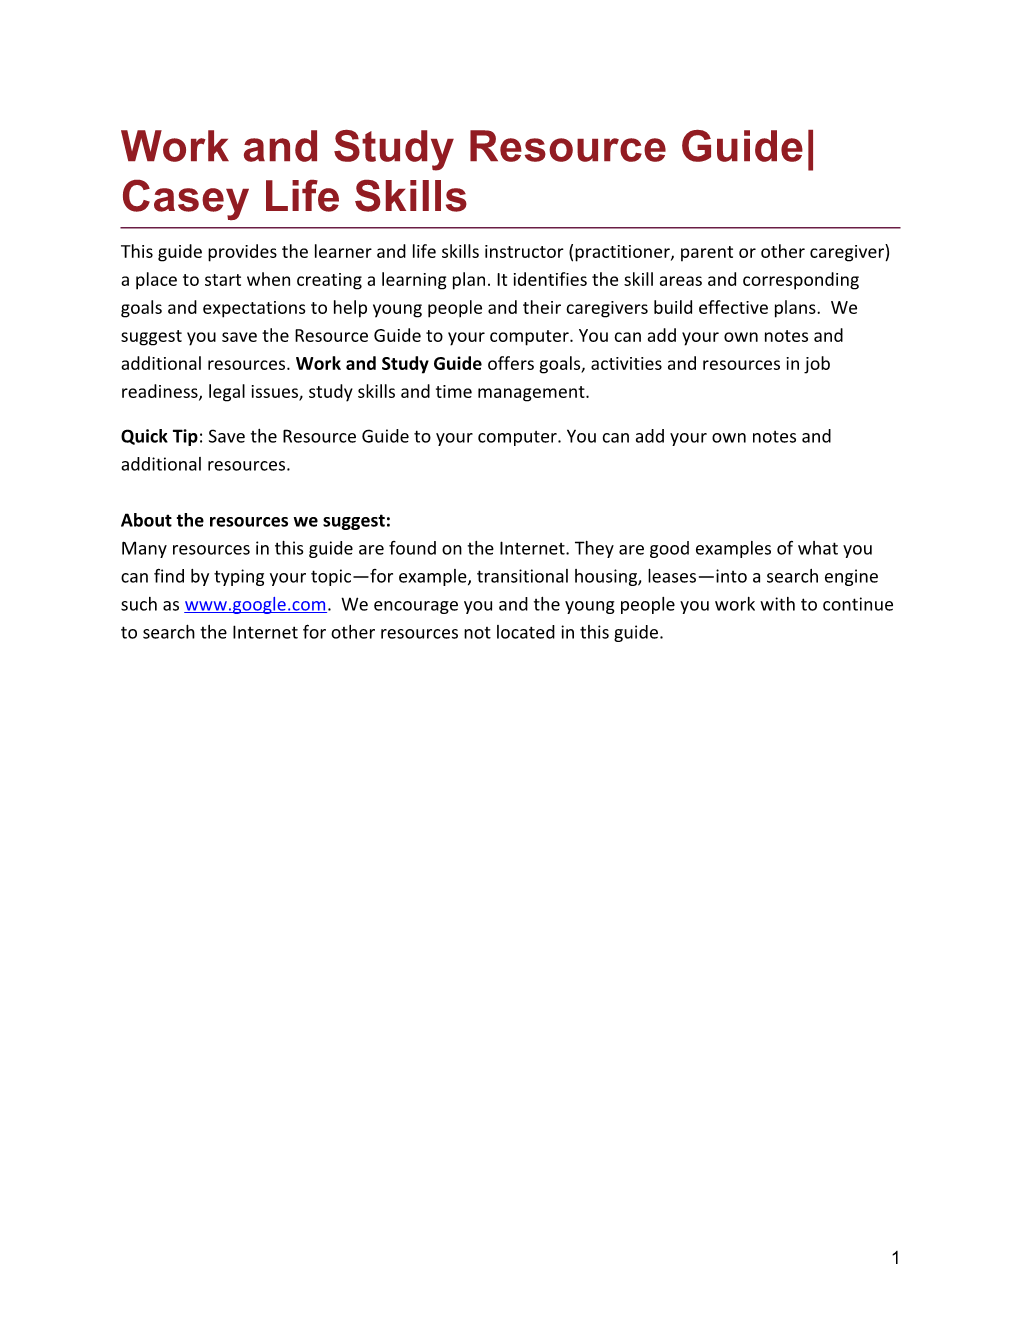 Work and Study Resource Guide Casey Life Skills